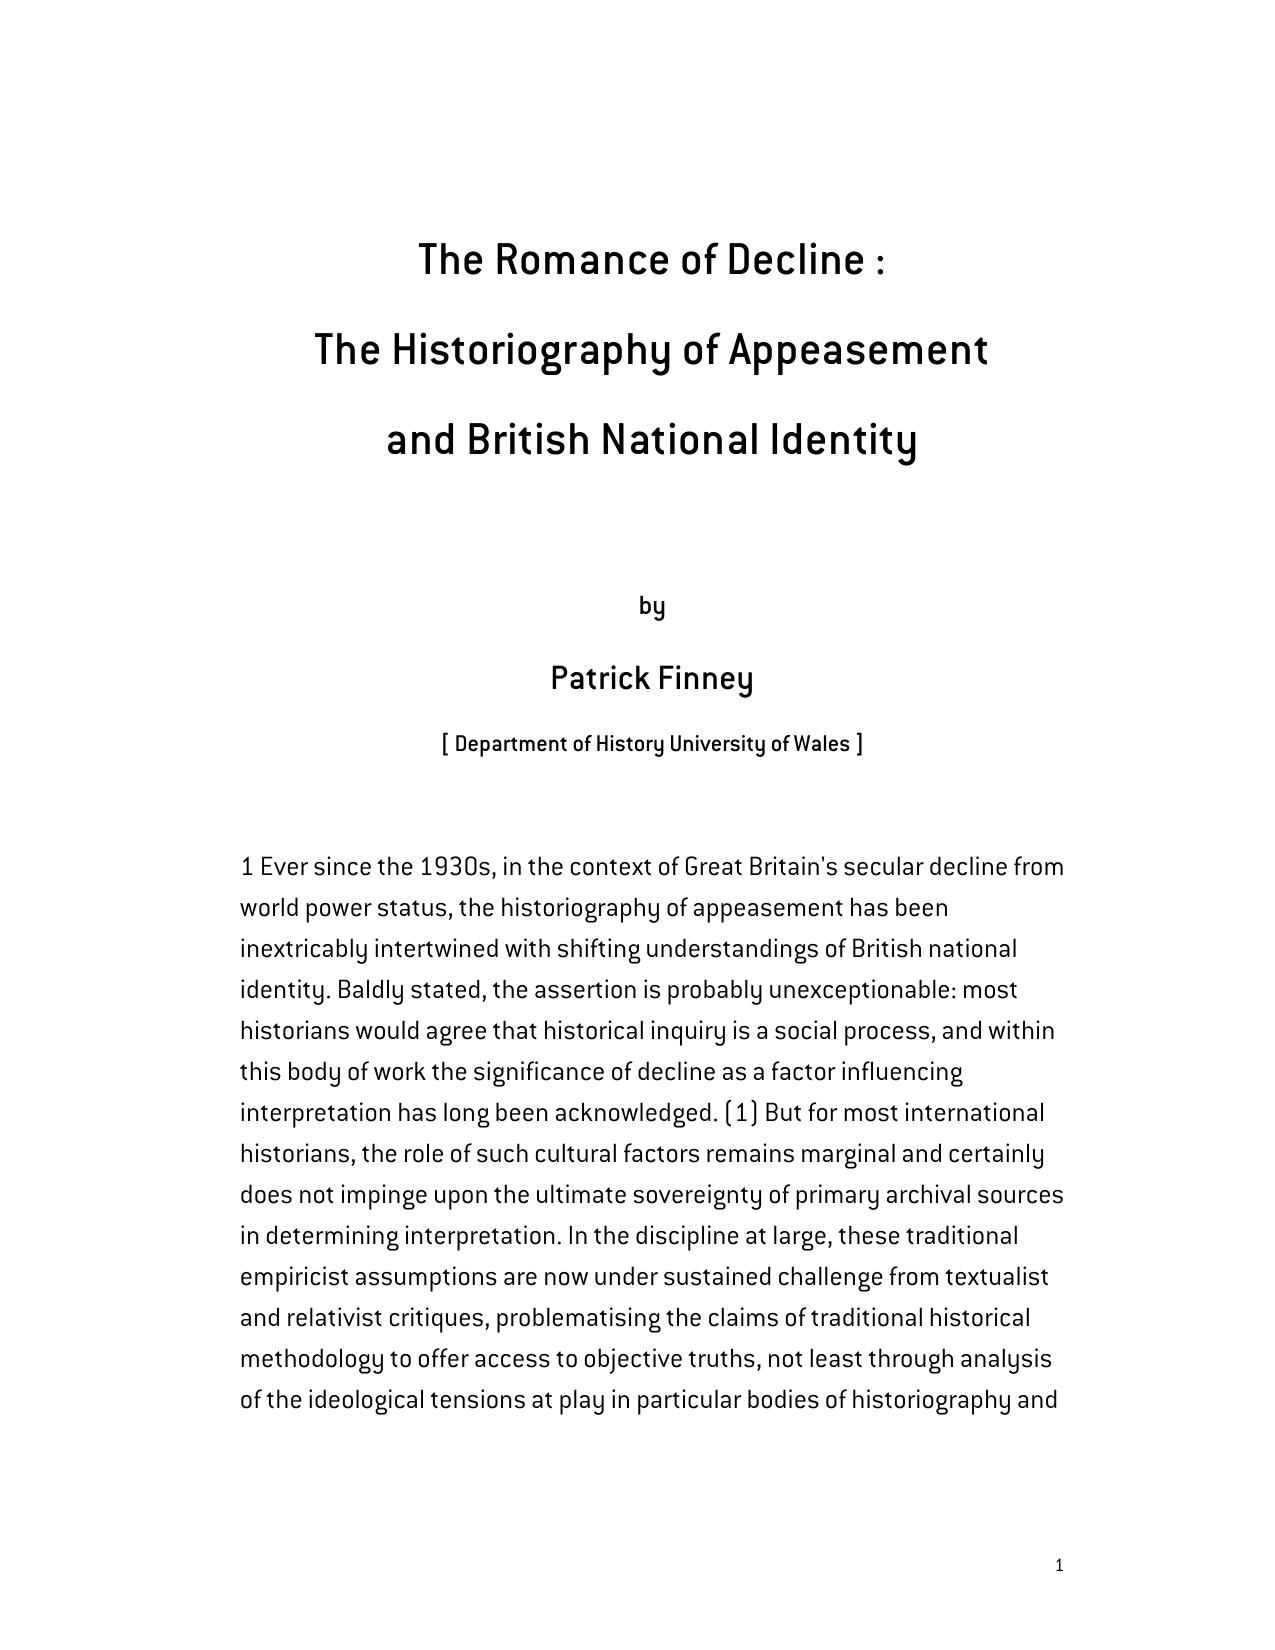 The Romance of Decline The Historiography of Appeasement